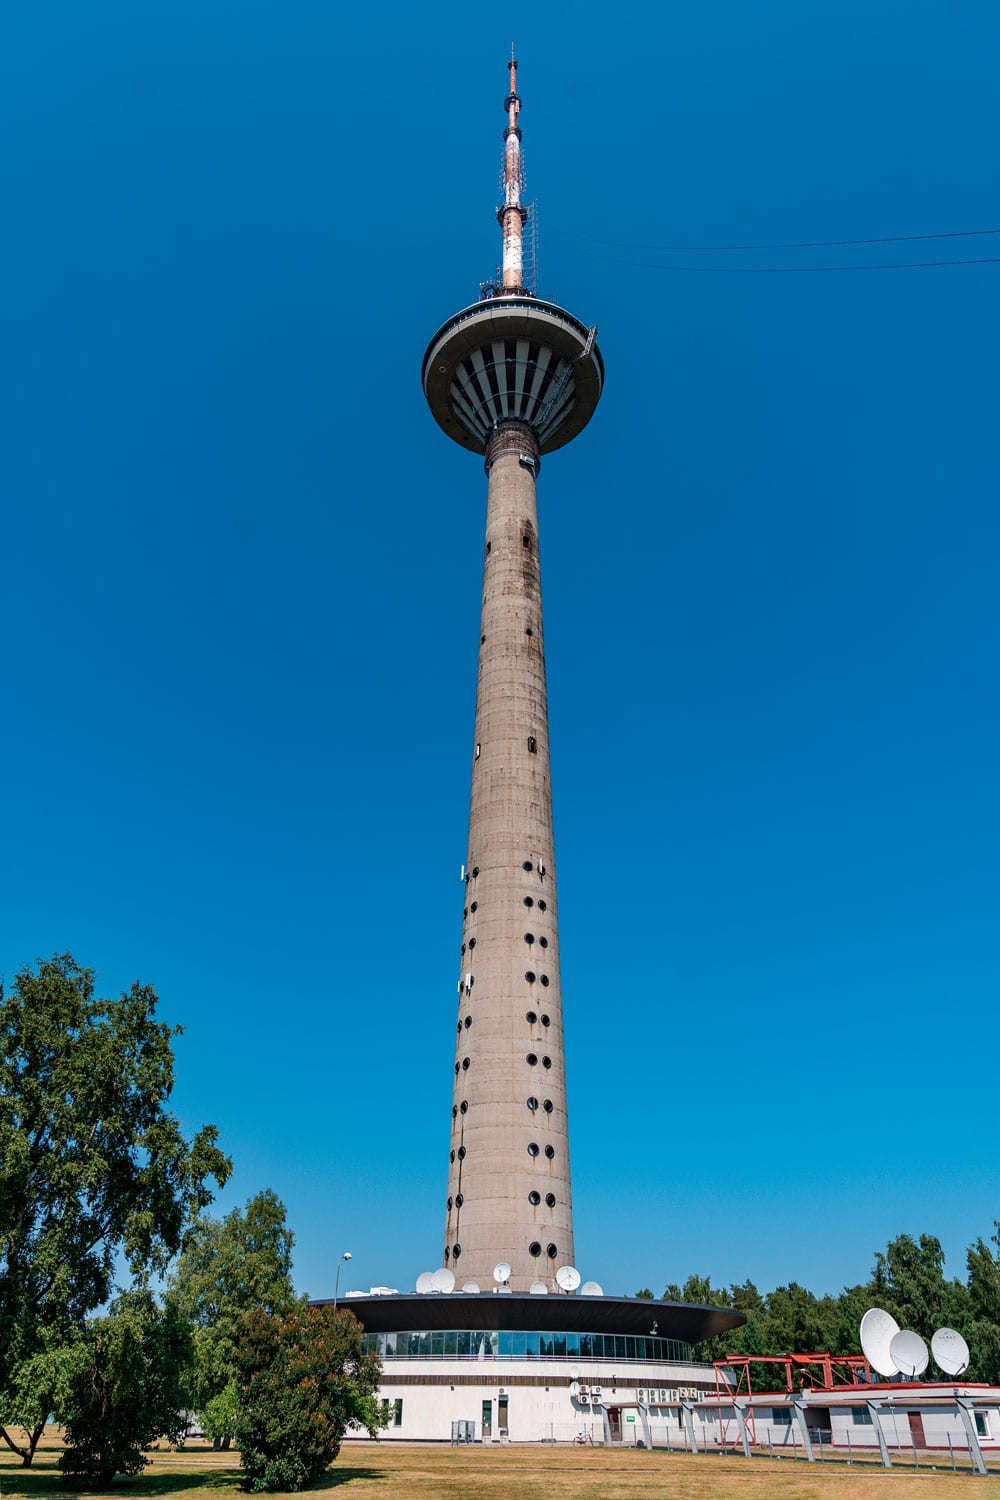 Tallinn TV Tower is the tallest building in northern Europe